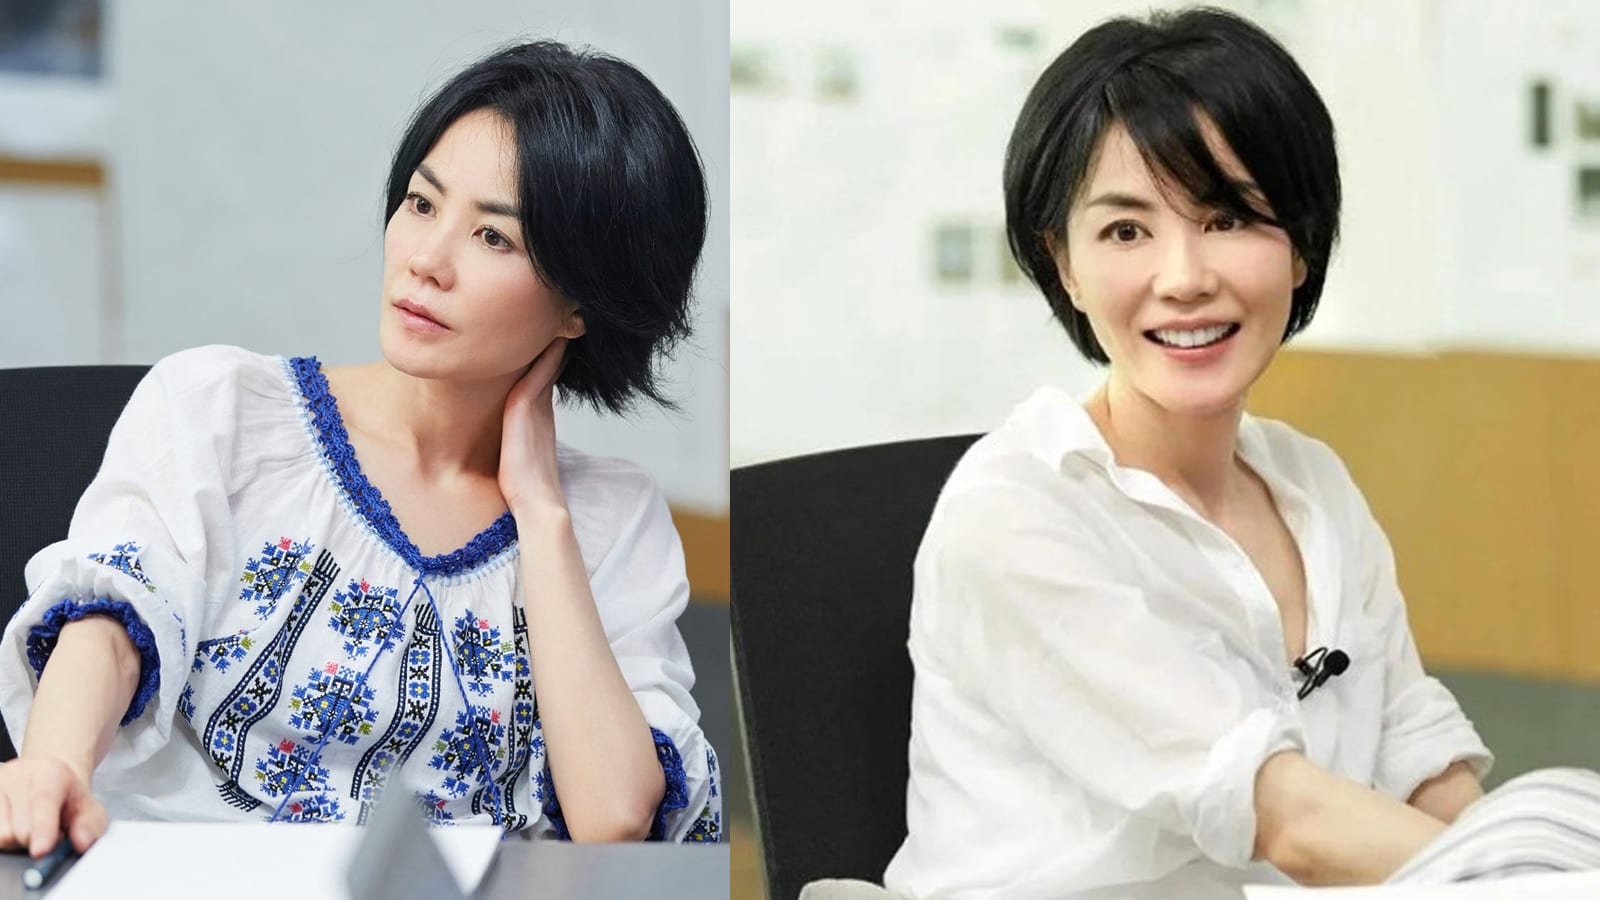 Faye Wong Would Wear A Huge Diamond Ring To Play Mahjong ‘Cos She Believed It Brought Her Luck